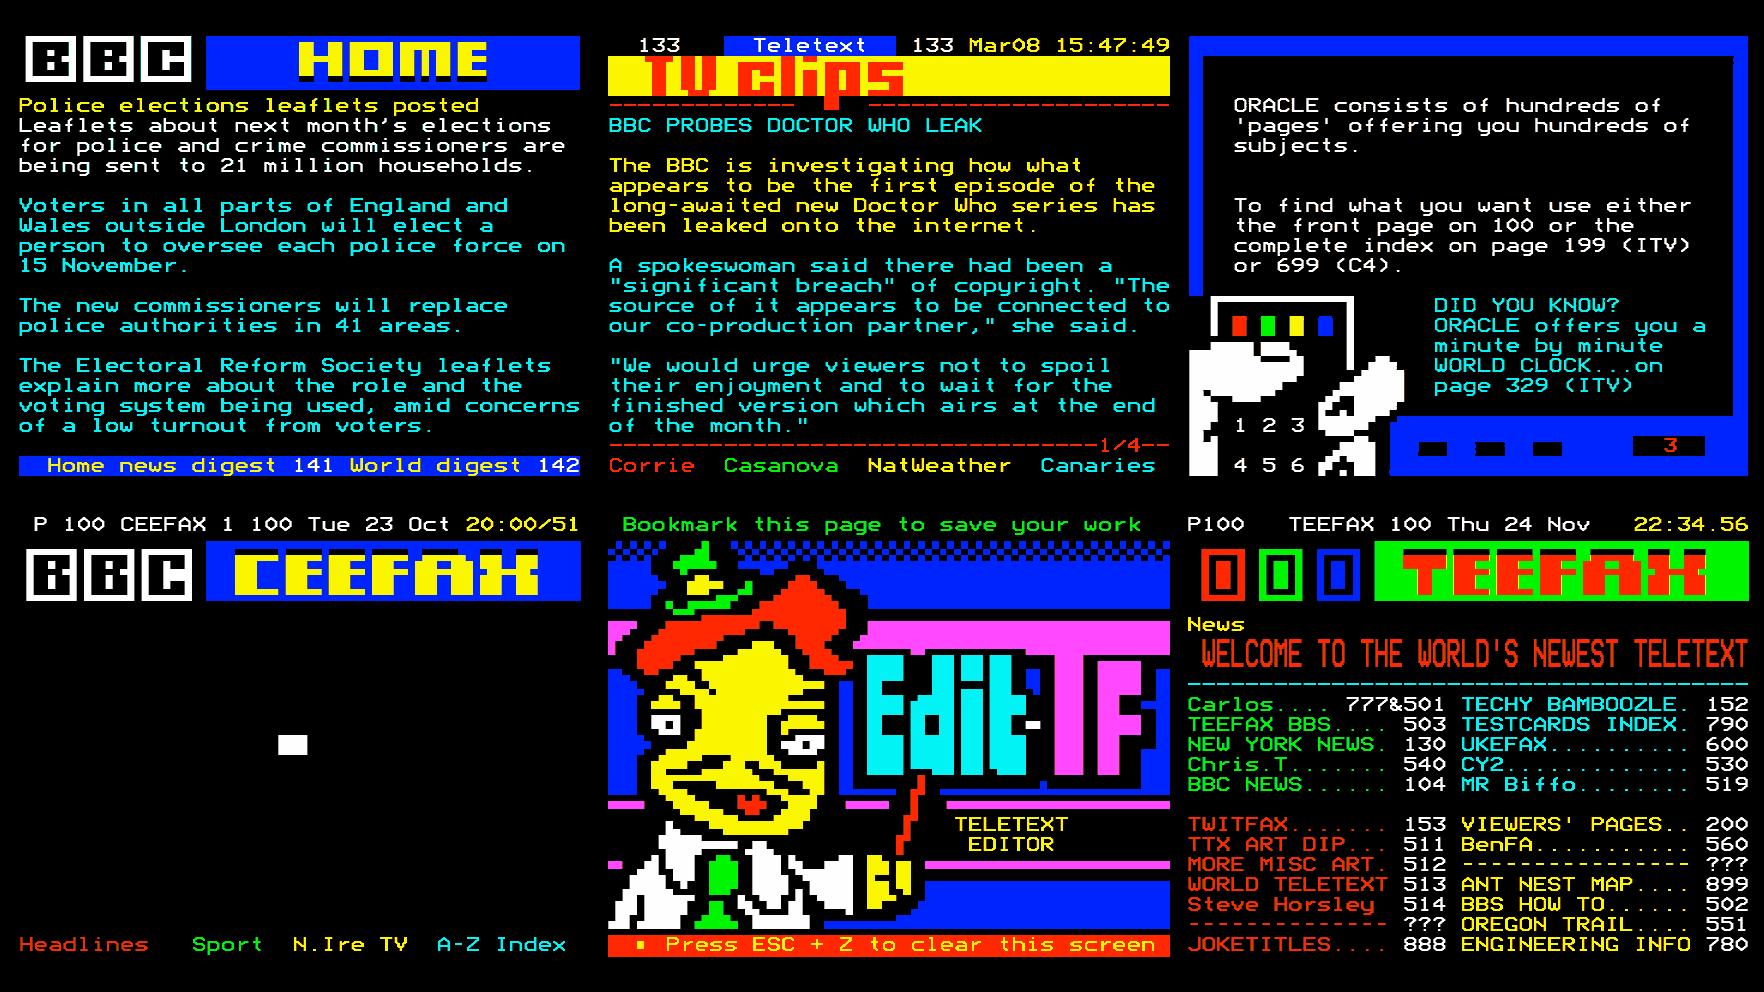 teletext hotels only